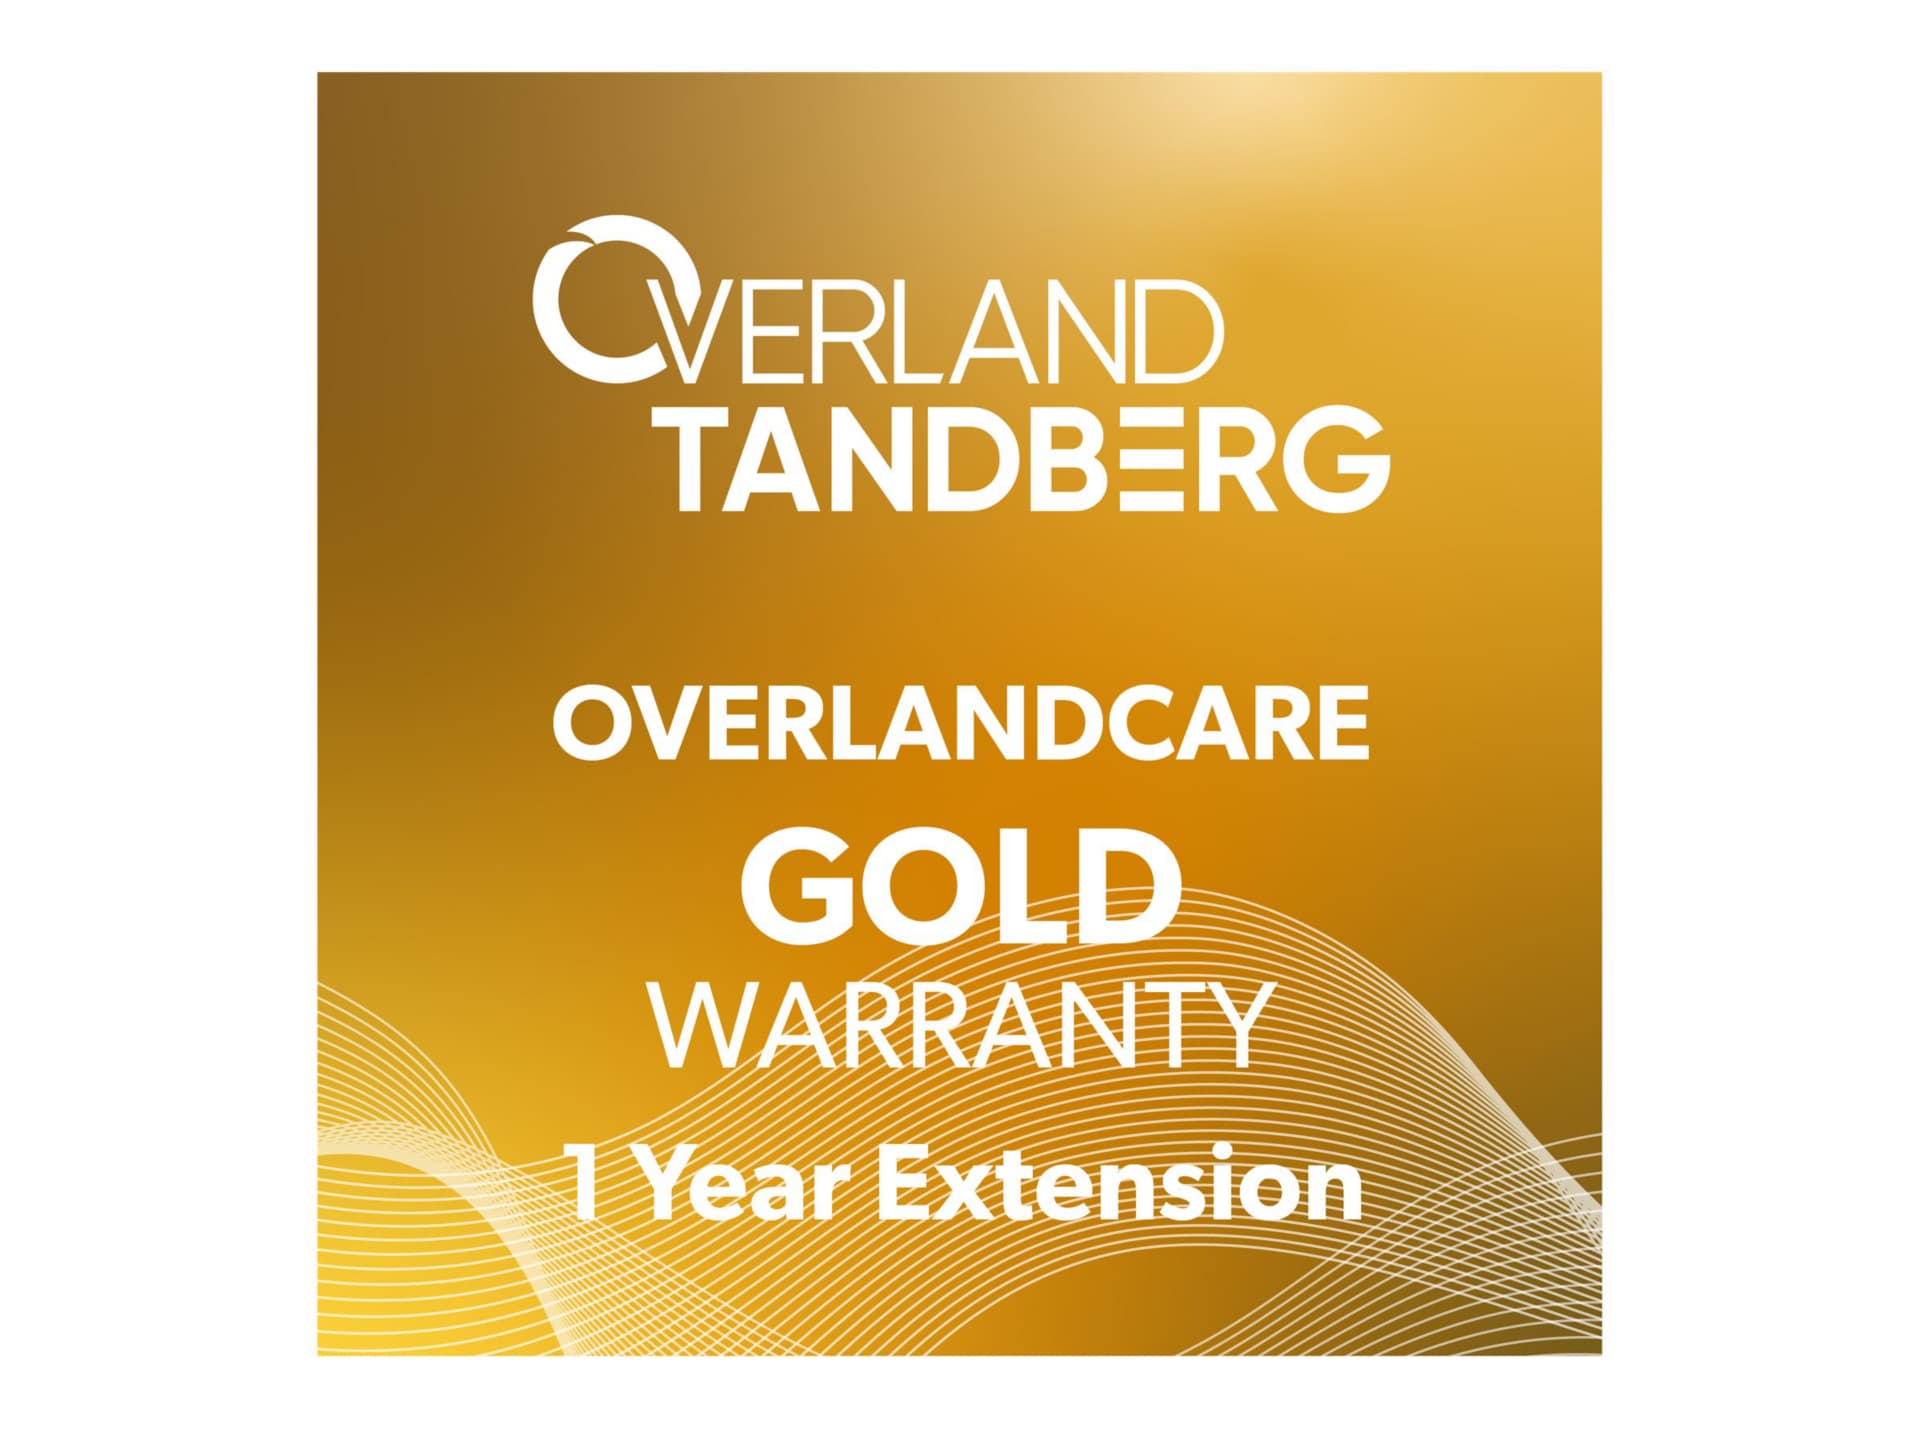 OverlandCare Gold - extended service agreement - 1 year - on-site